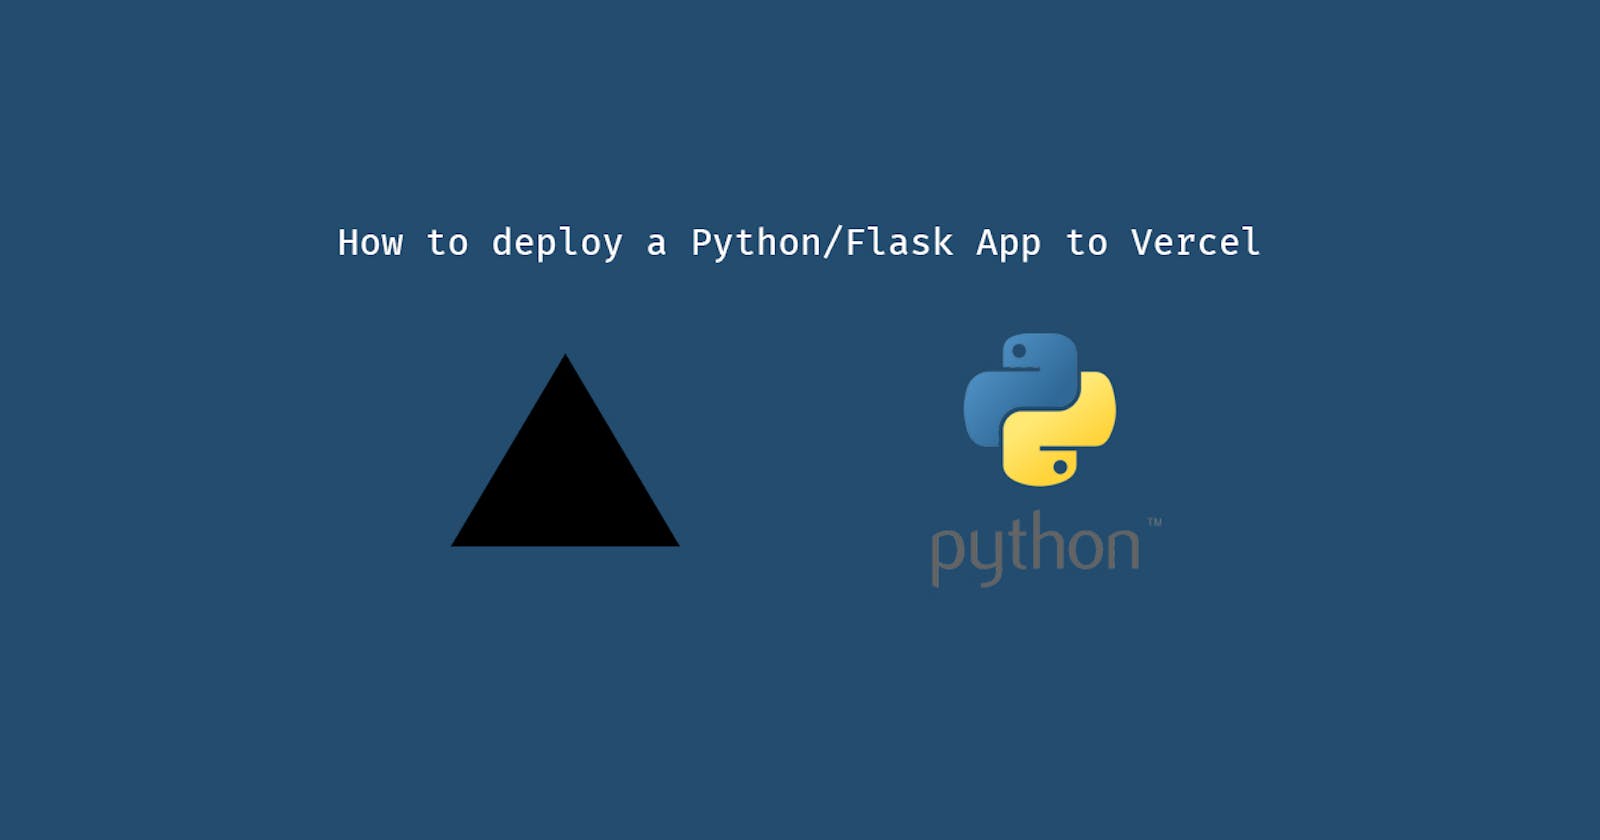 How to deploy a Python/Flask App to Vercel